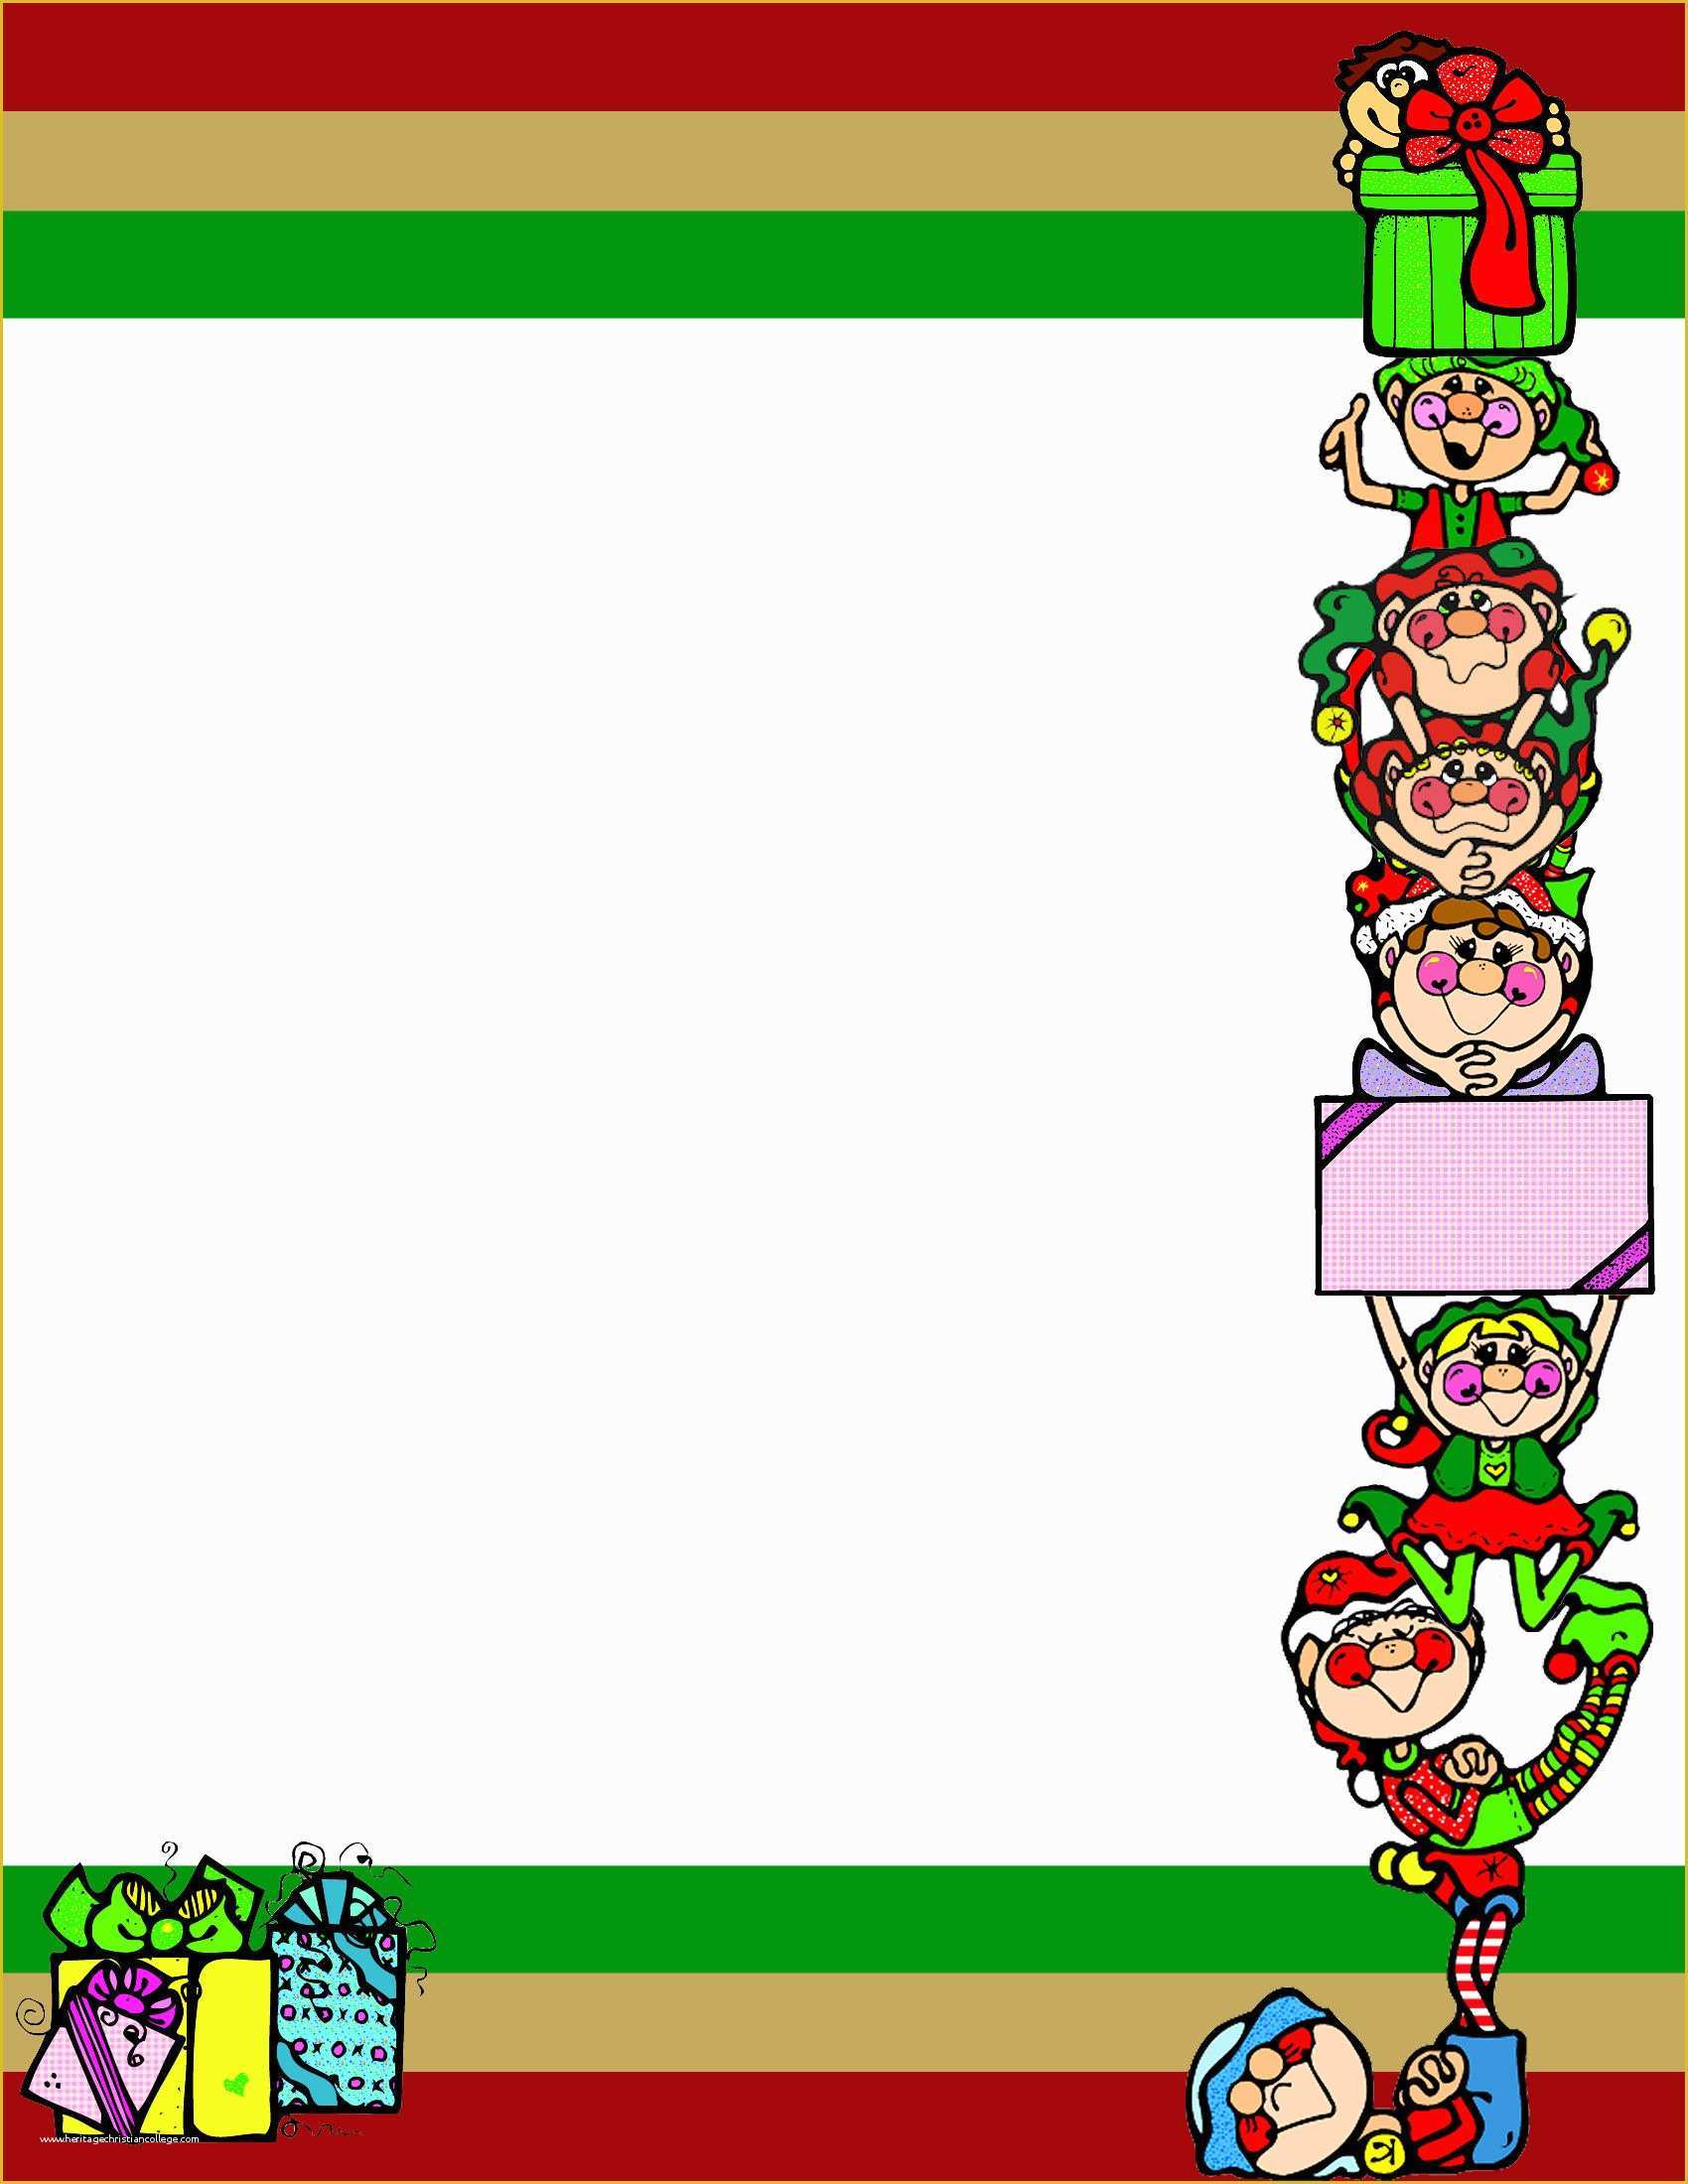 Free Christmas Stationery Templates Of Christmas 1 Free Stationery